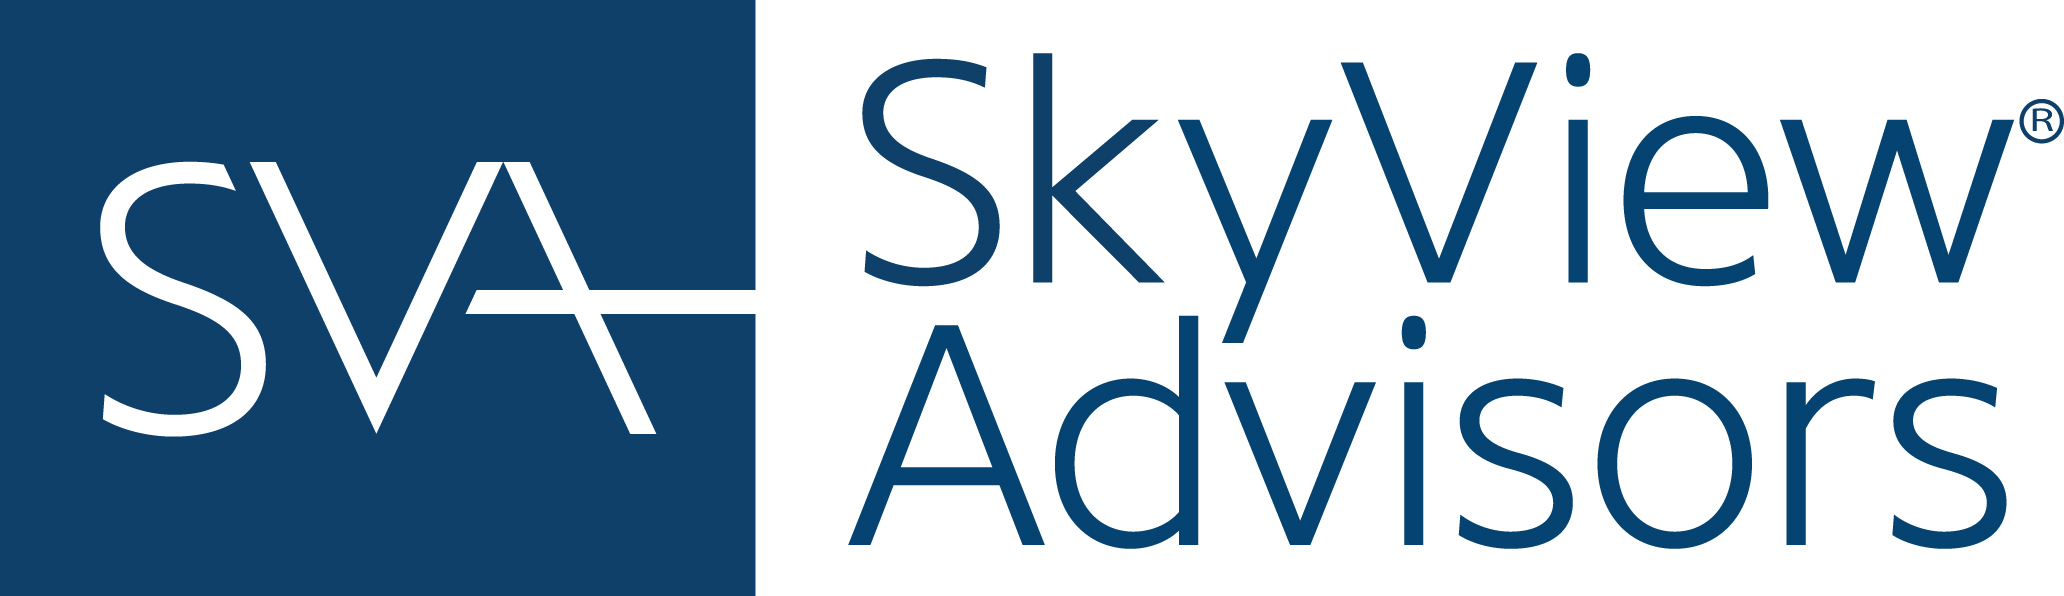 Sky View Advisors, Tuesday, June 29, 2021, Press release picture